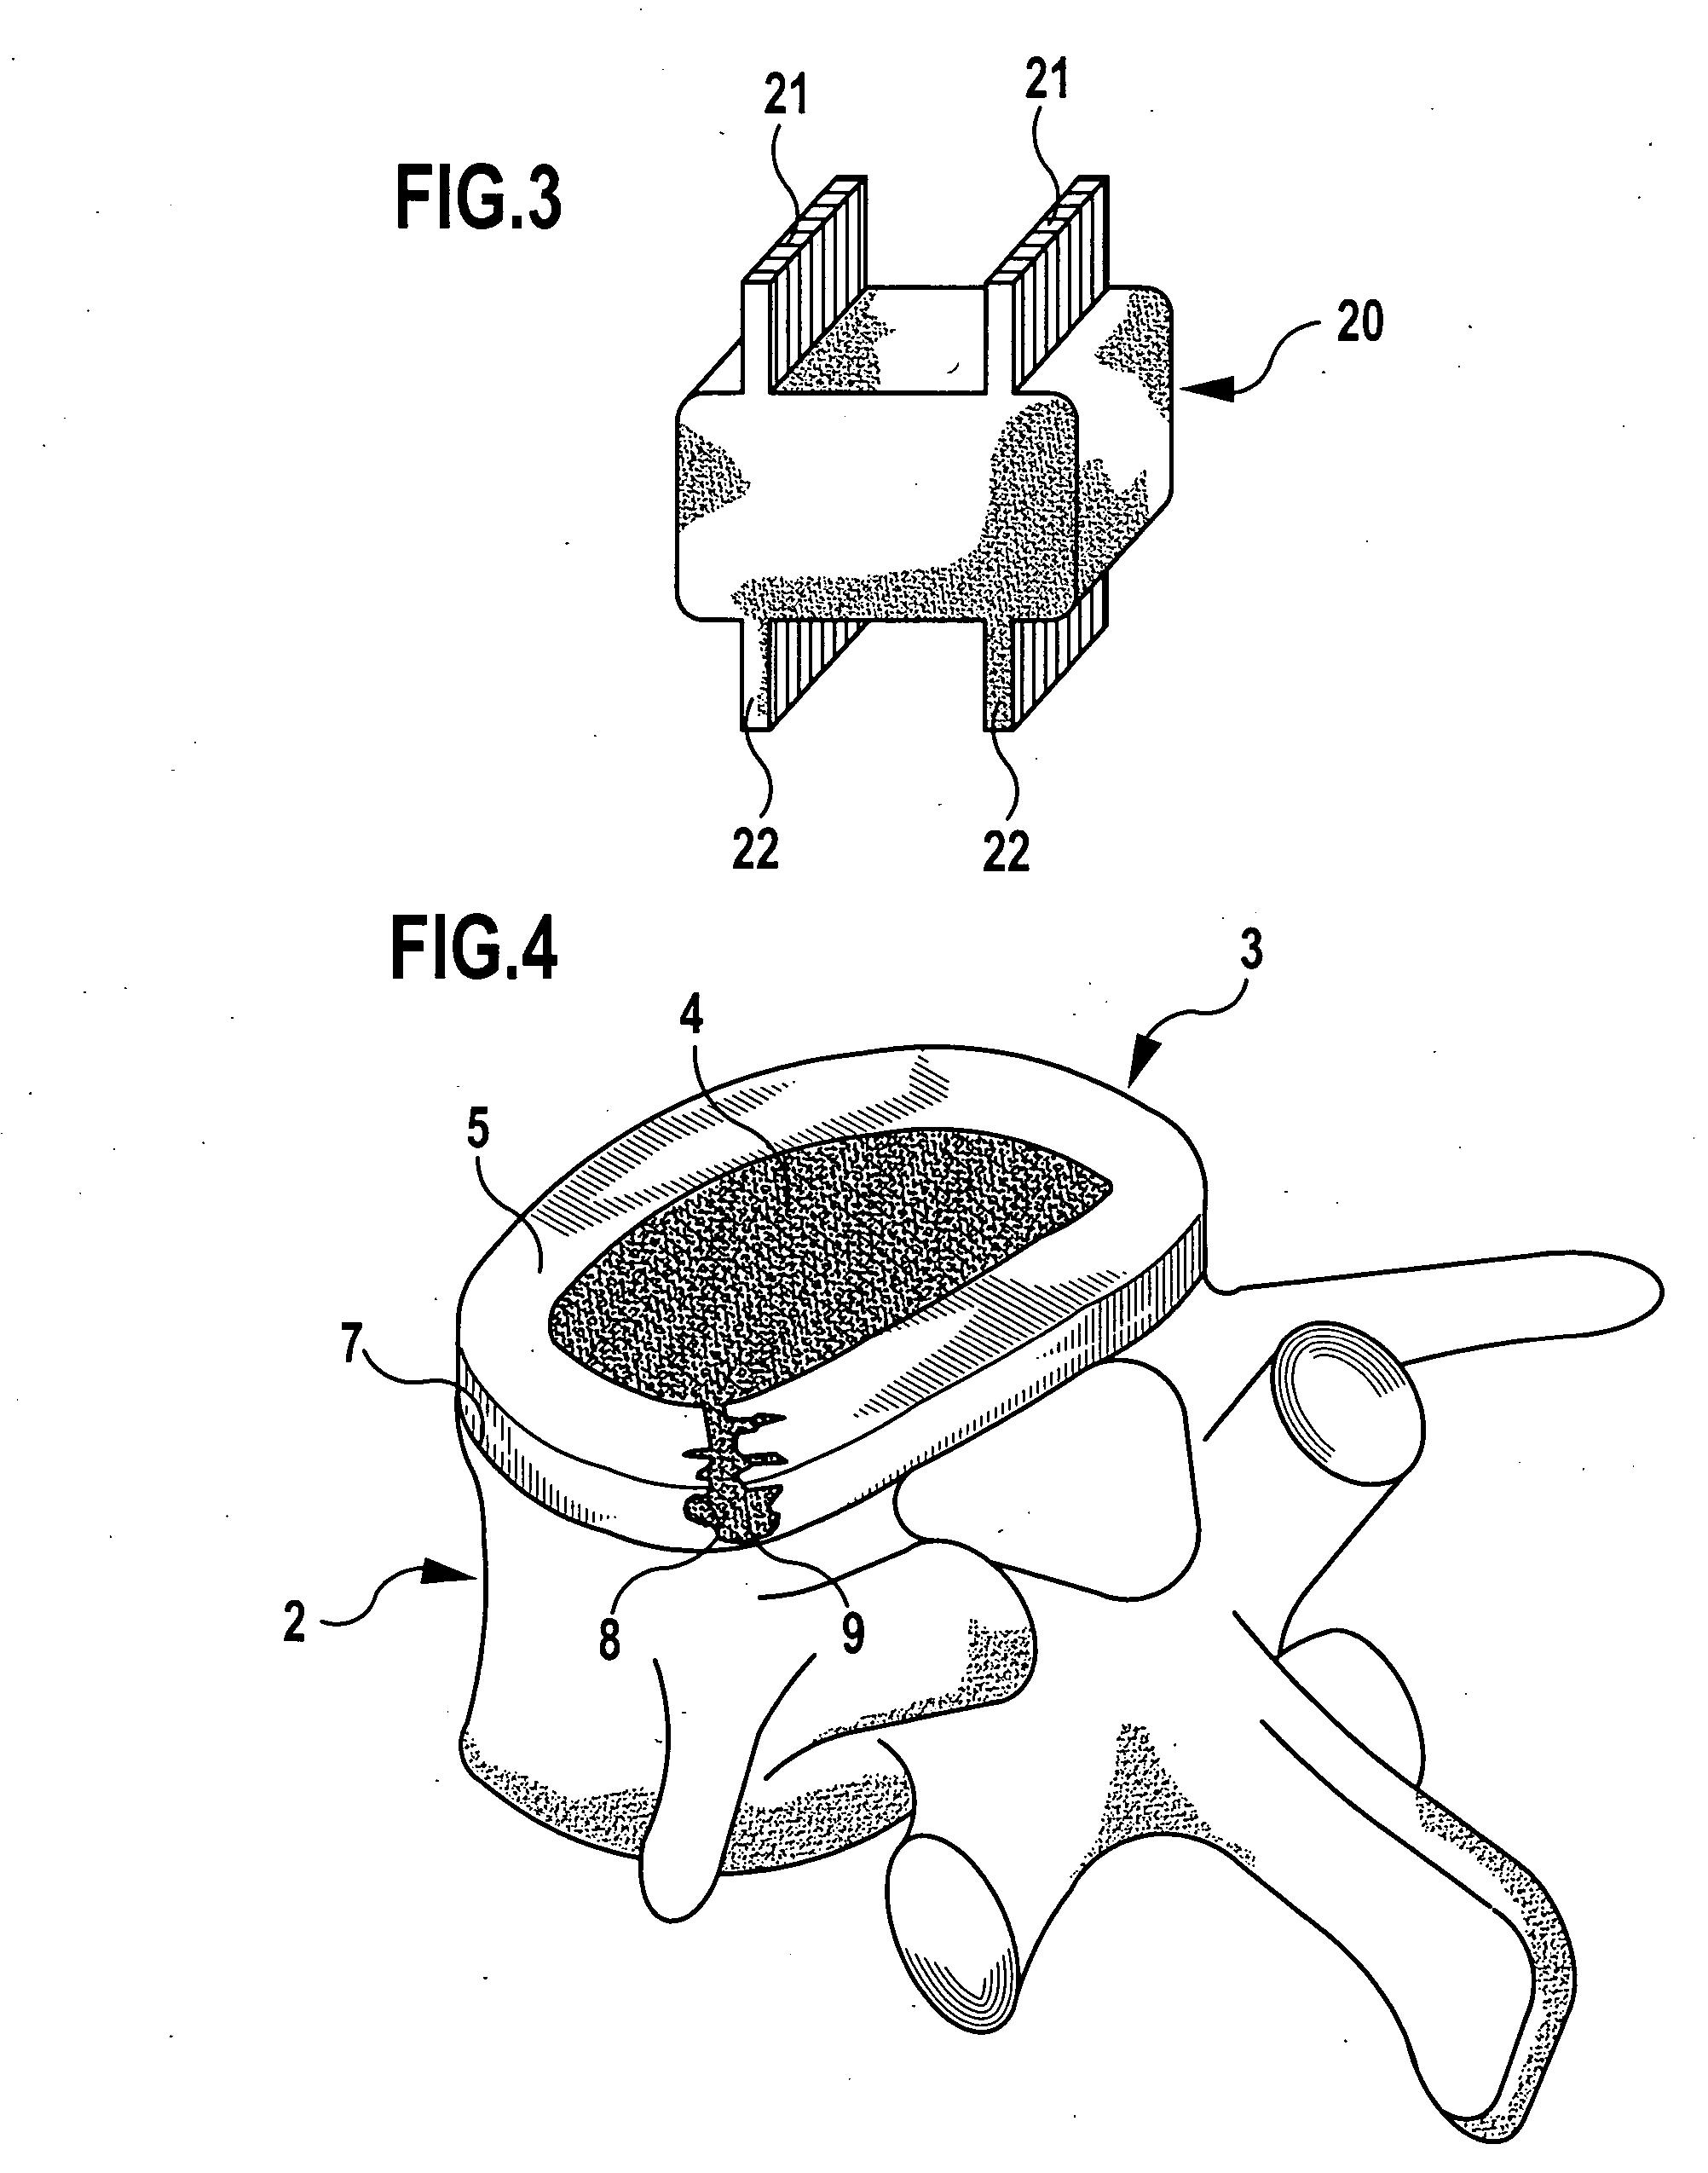 Implant for closing an opening in the annulus fibrosus